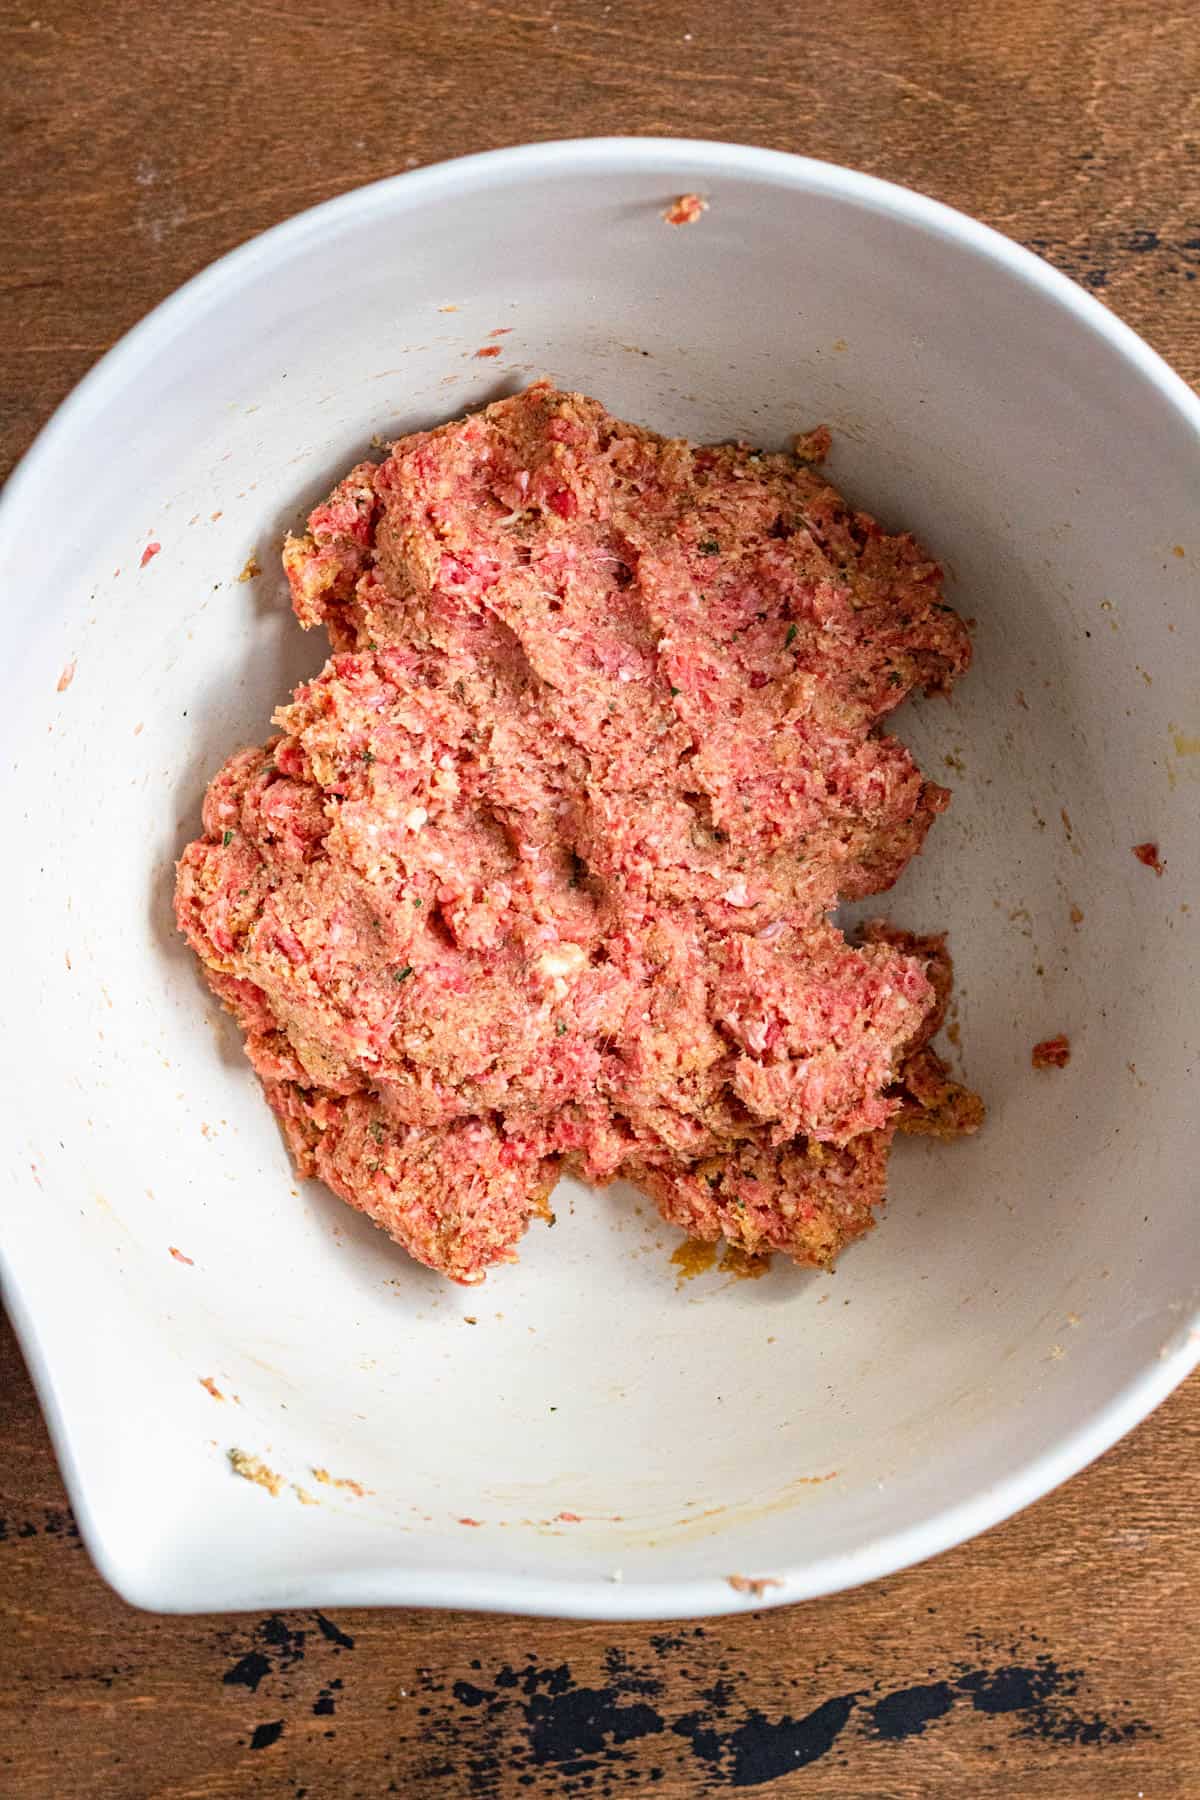 Ground chuck combined with seasoning to make soft meatballs recipe.